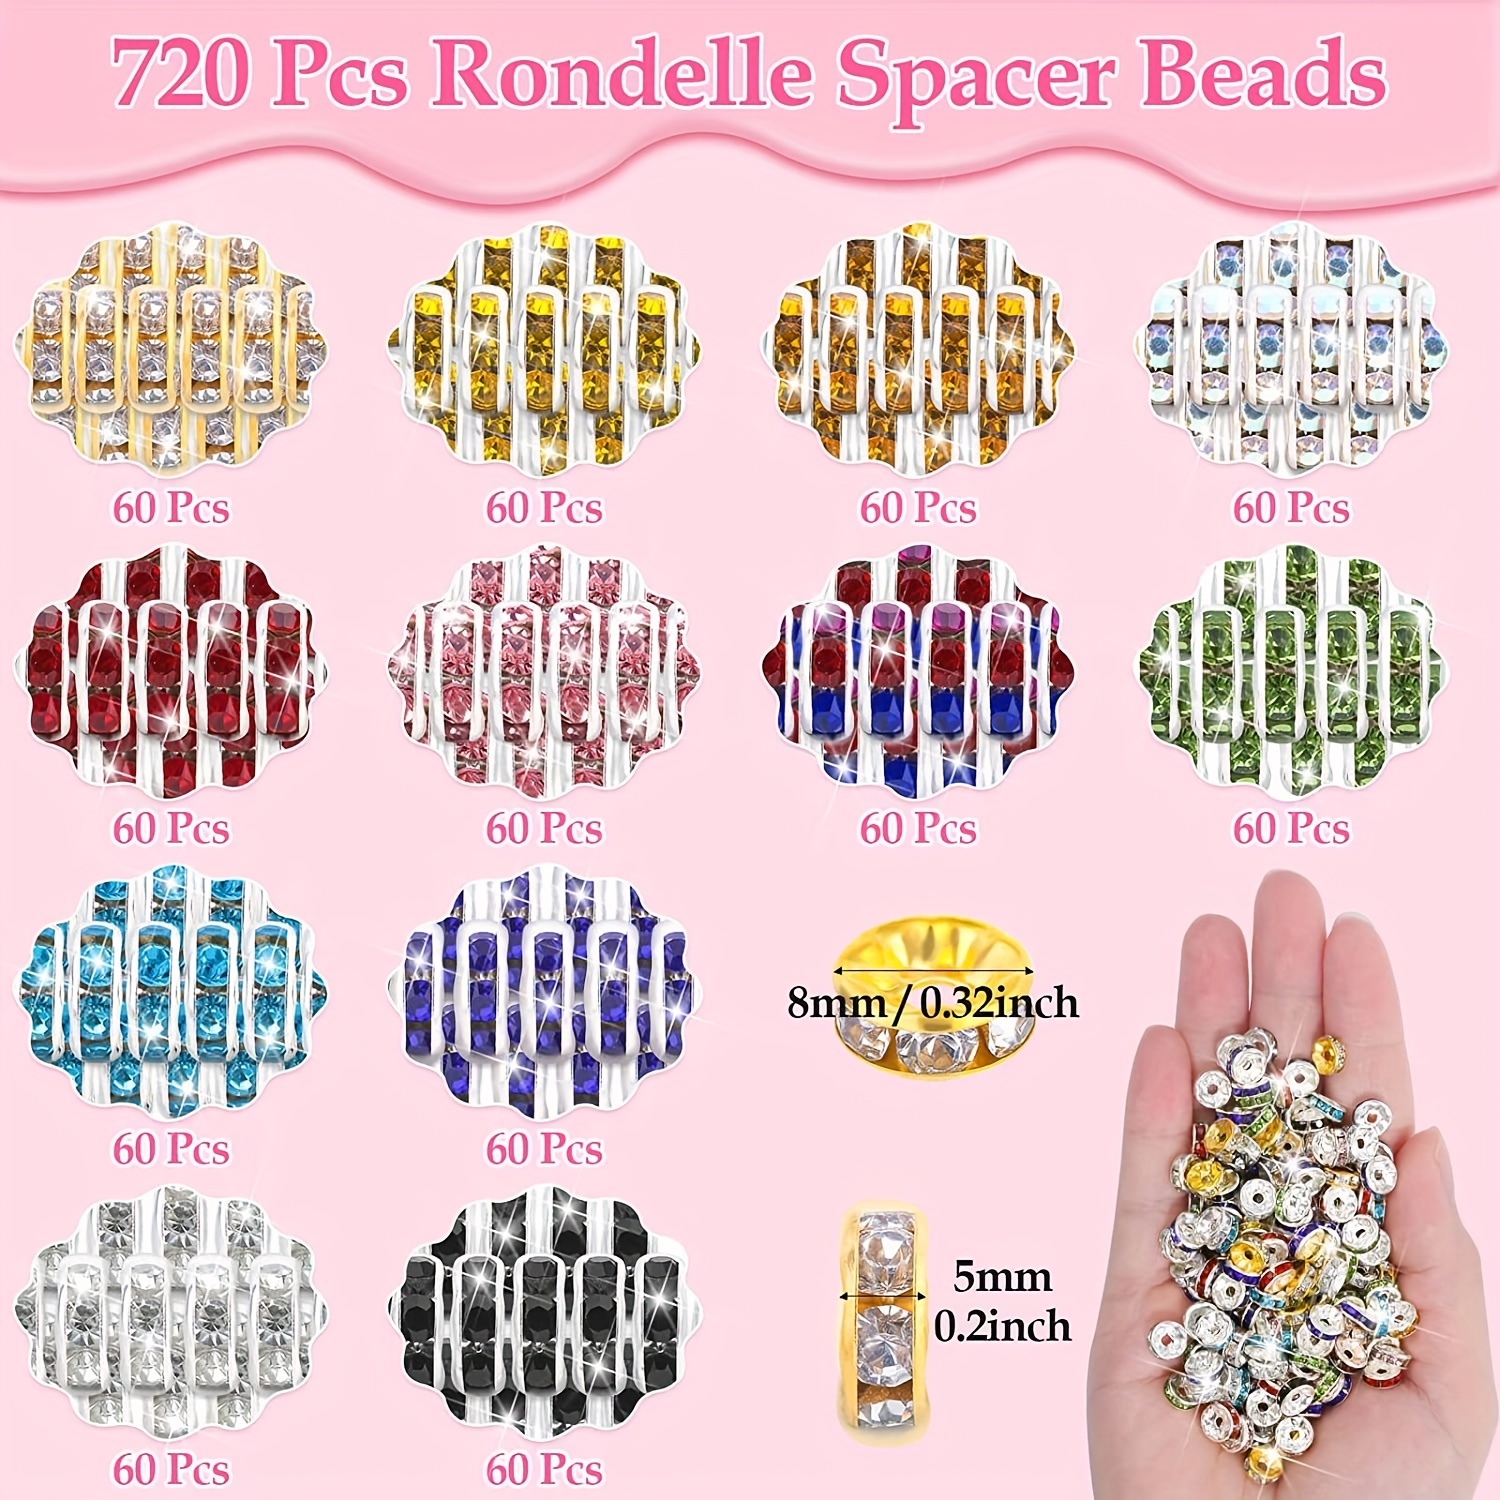 Rondelle Spacer Beads for Jewelry Making, 720 Pieces Rhinestone Bead  Spacers for Bracelets, Spacer Beads for Pens Making(12 Colors)